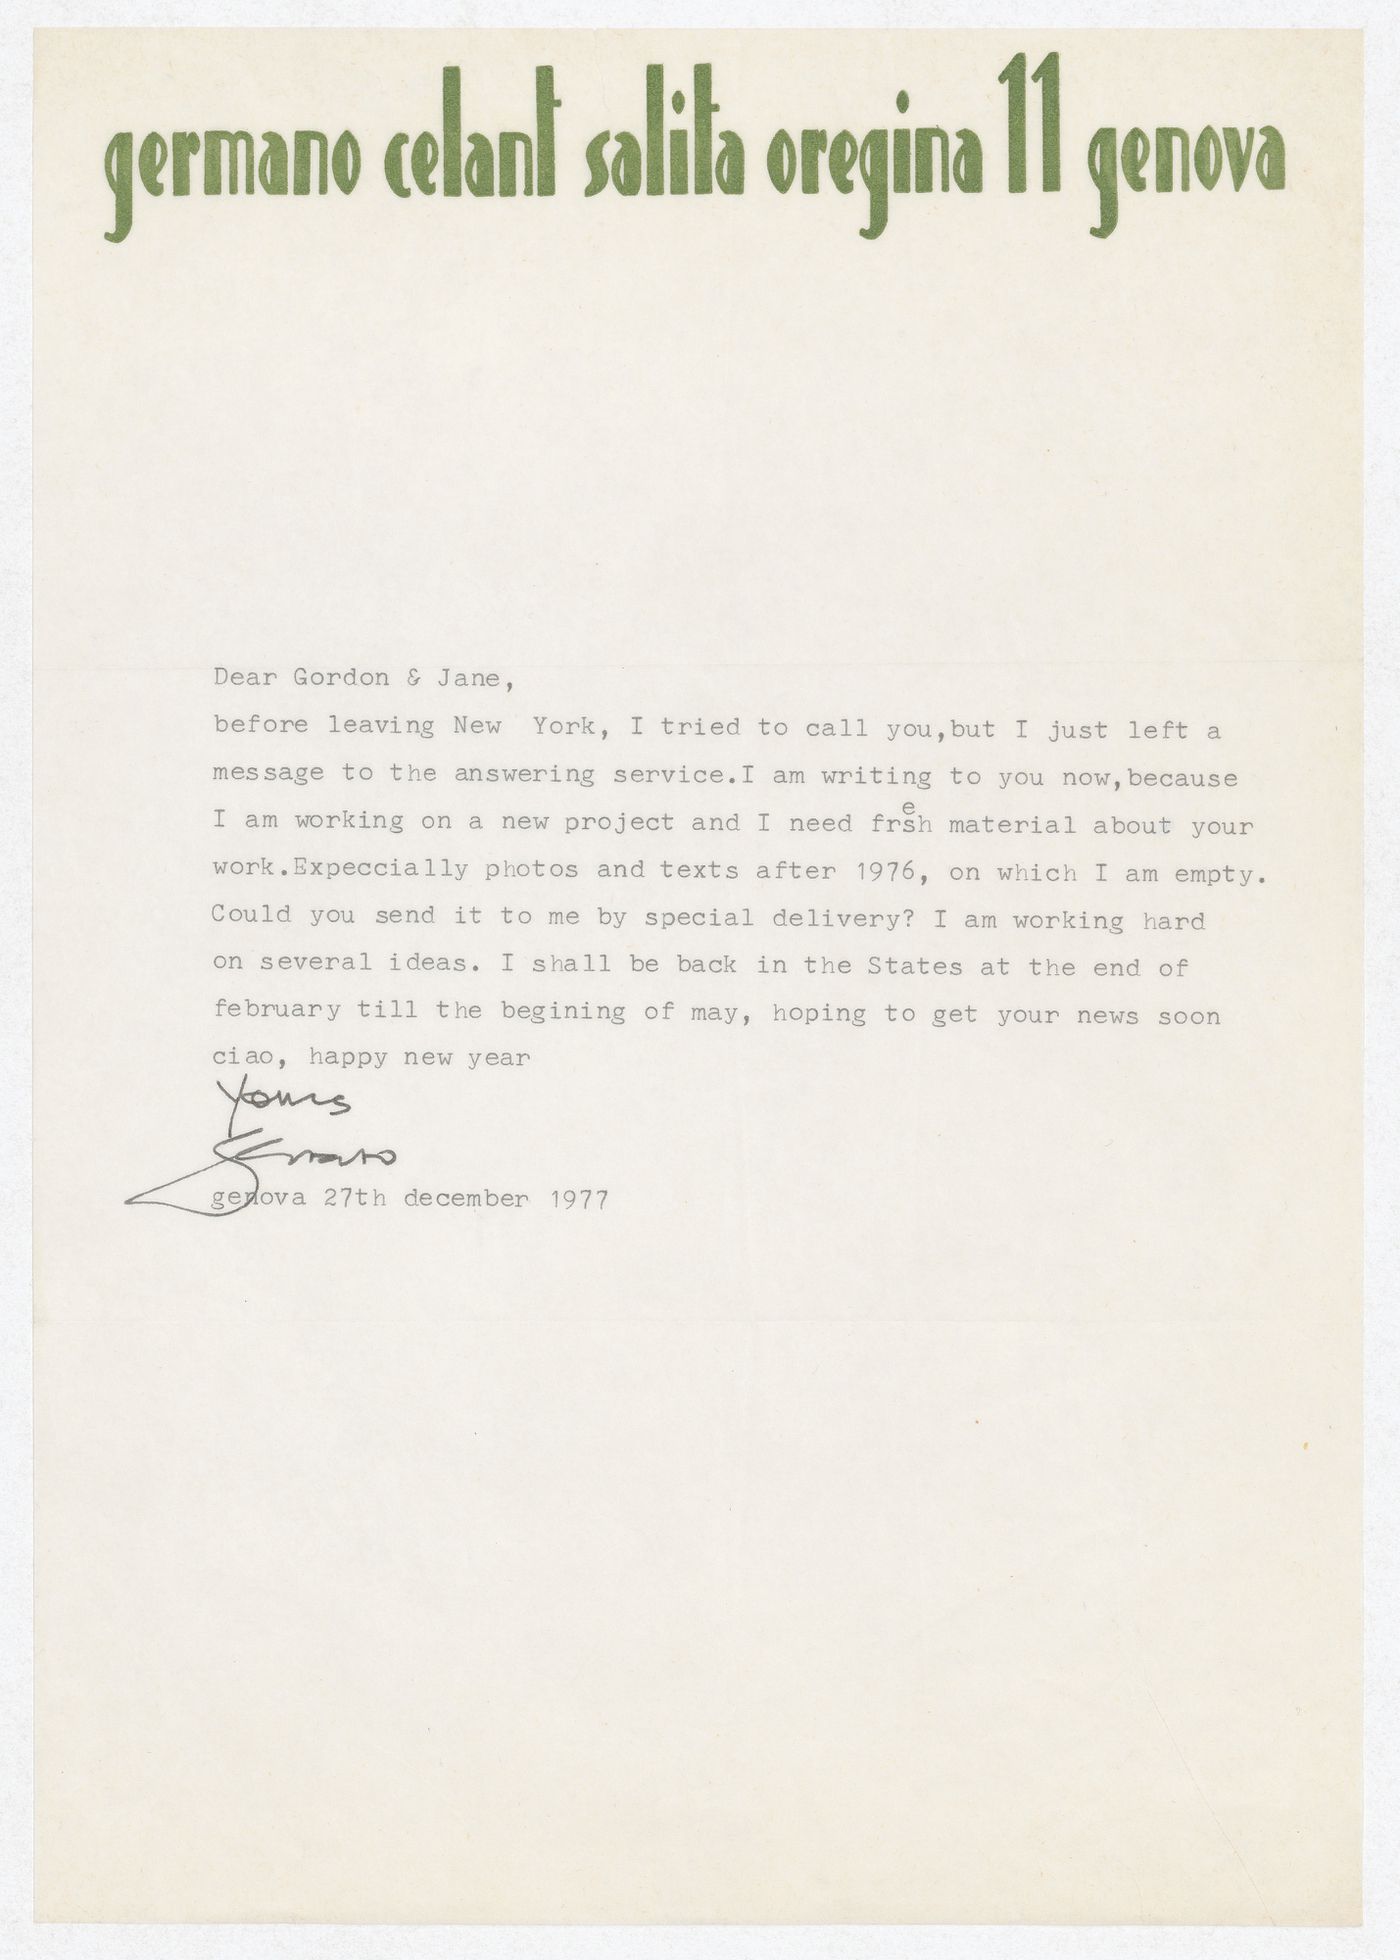 Letter from Germano Celant to Gordon Matta-Clark and Jane Crawford